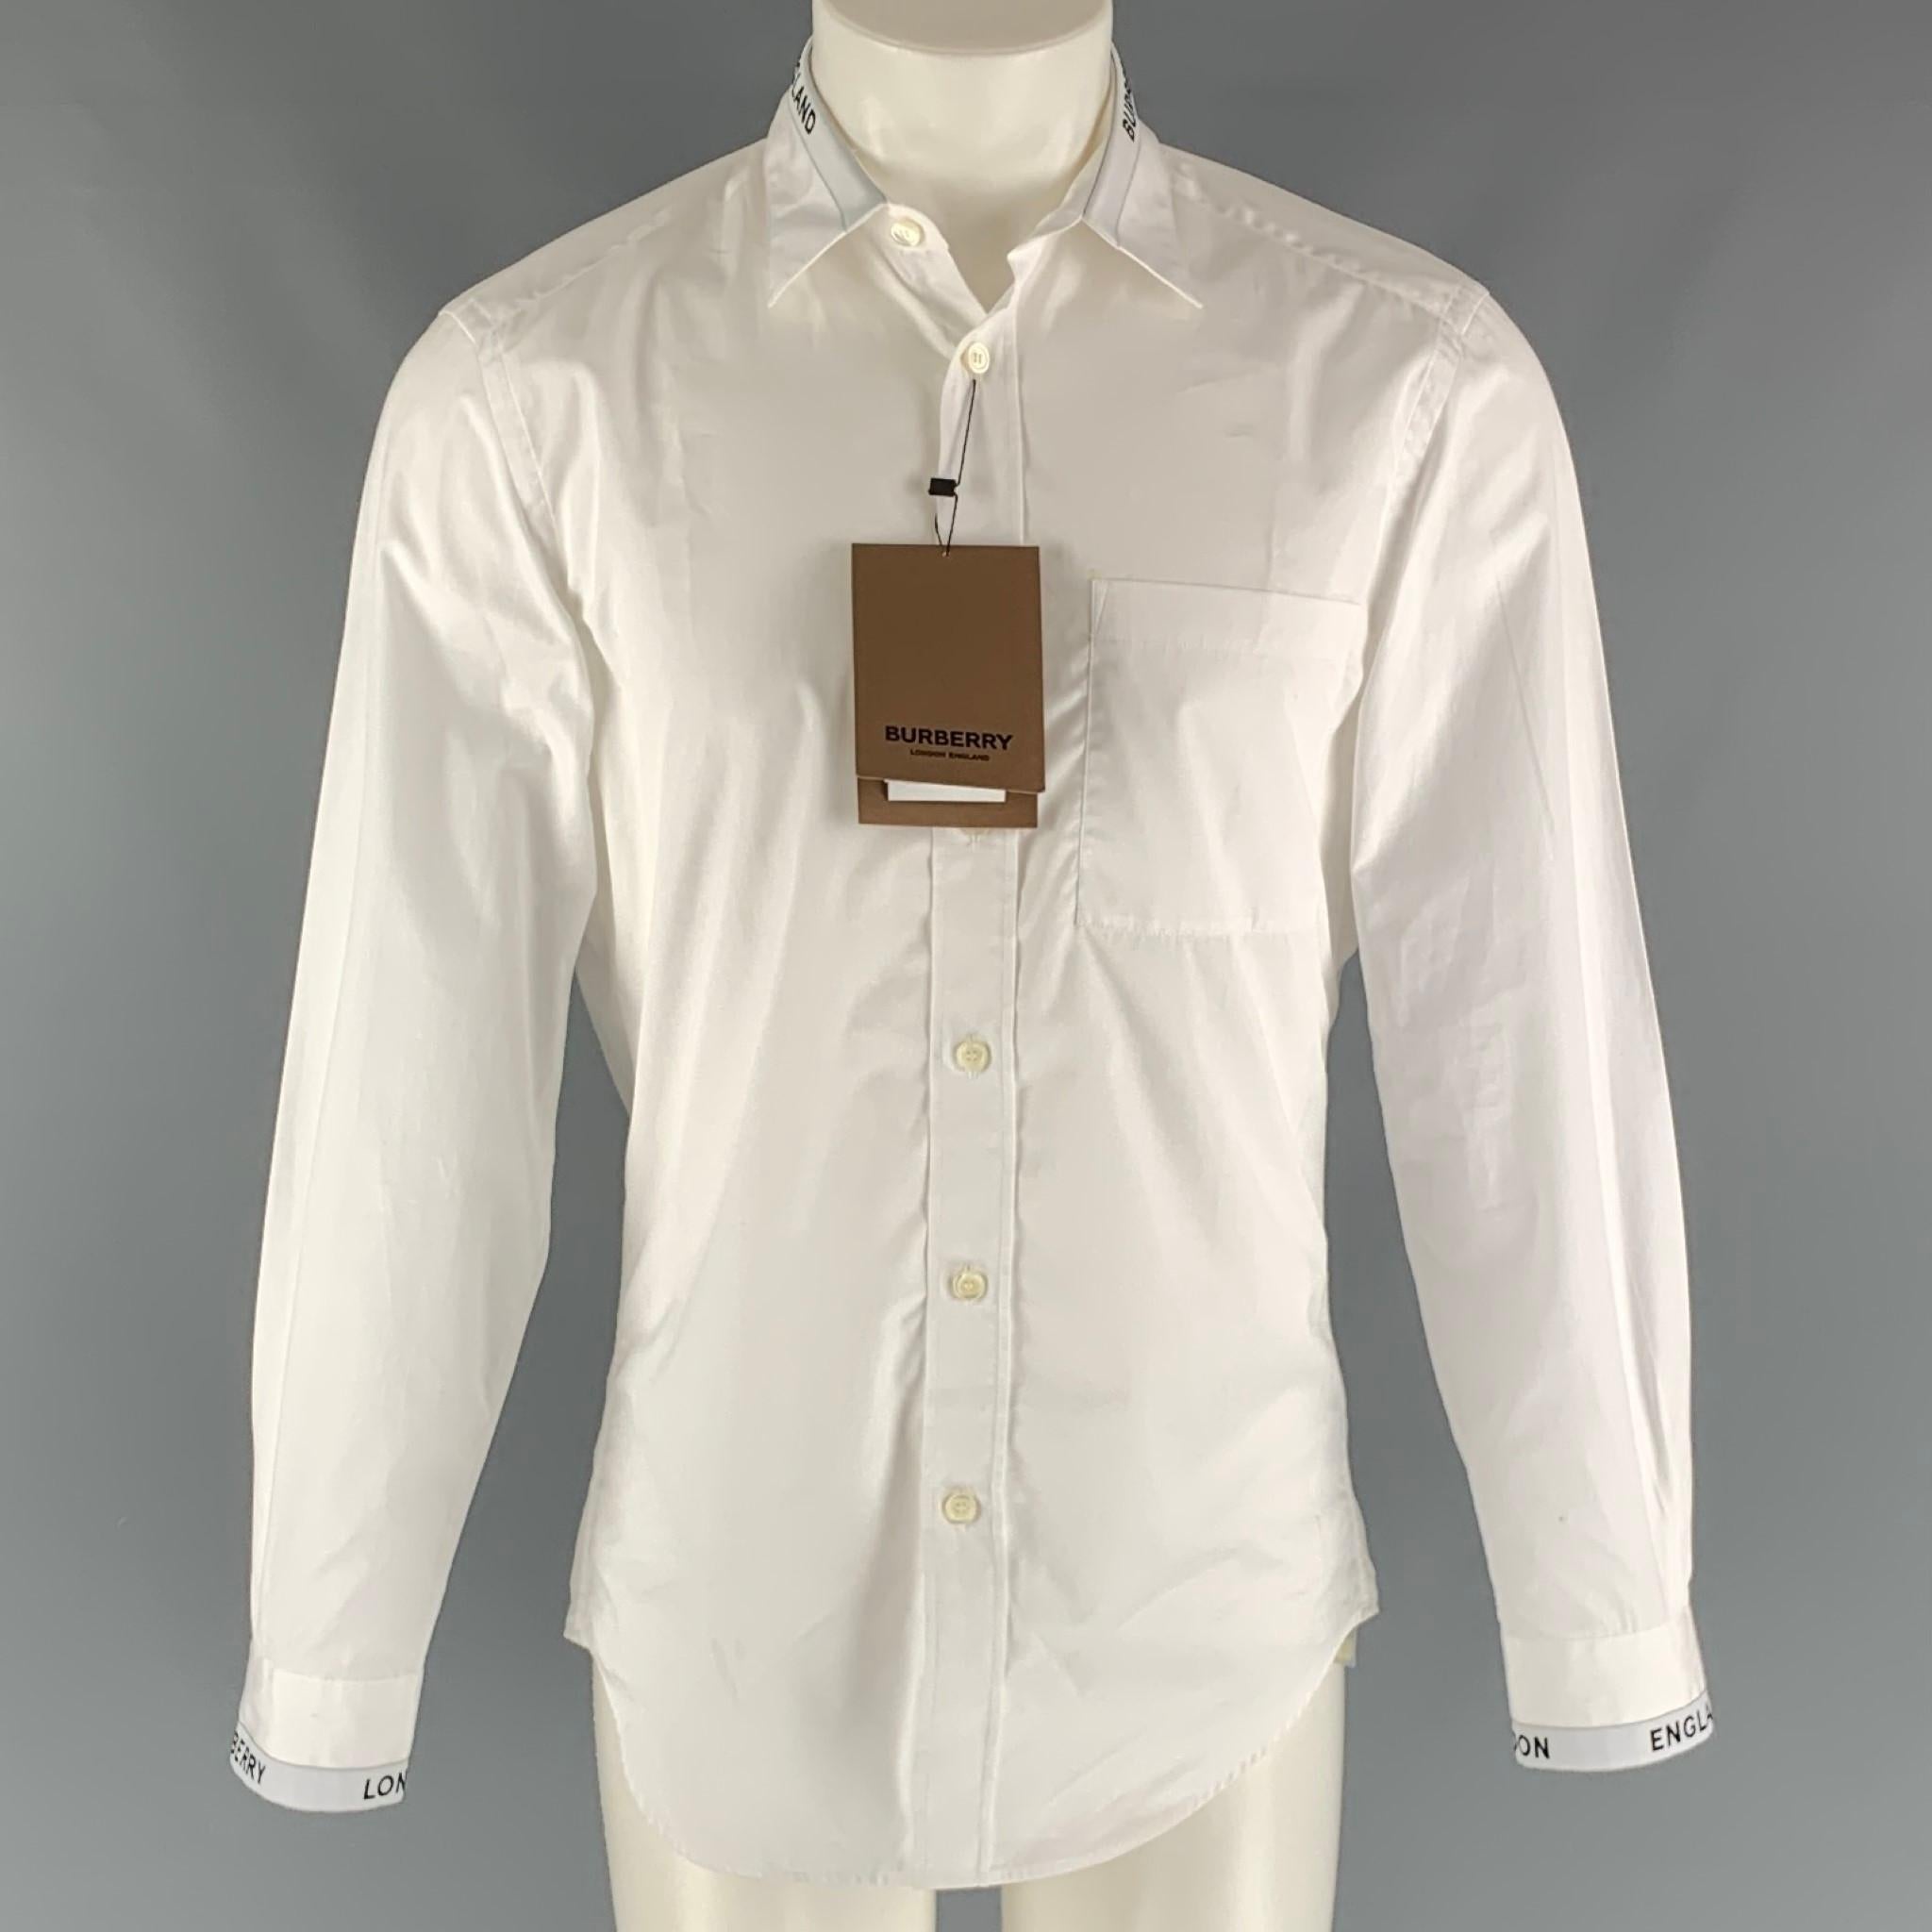 Burberry by Ricardo Tisci long sleeve shirt comes in a white cotton featuring straight collar, Burberry London trim at collar and sleeve cuffs, and buttons closure. Made in Portugal.

Very Good Pre-Owned Condition. With Tags. Moderate marks.
Marked: